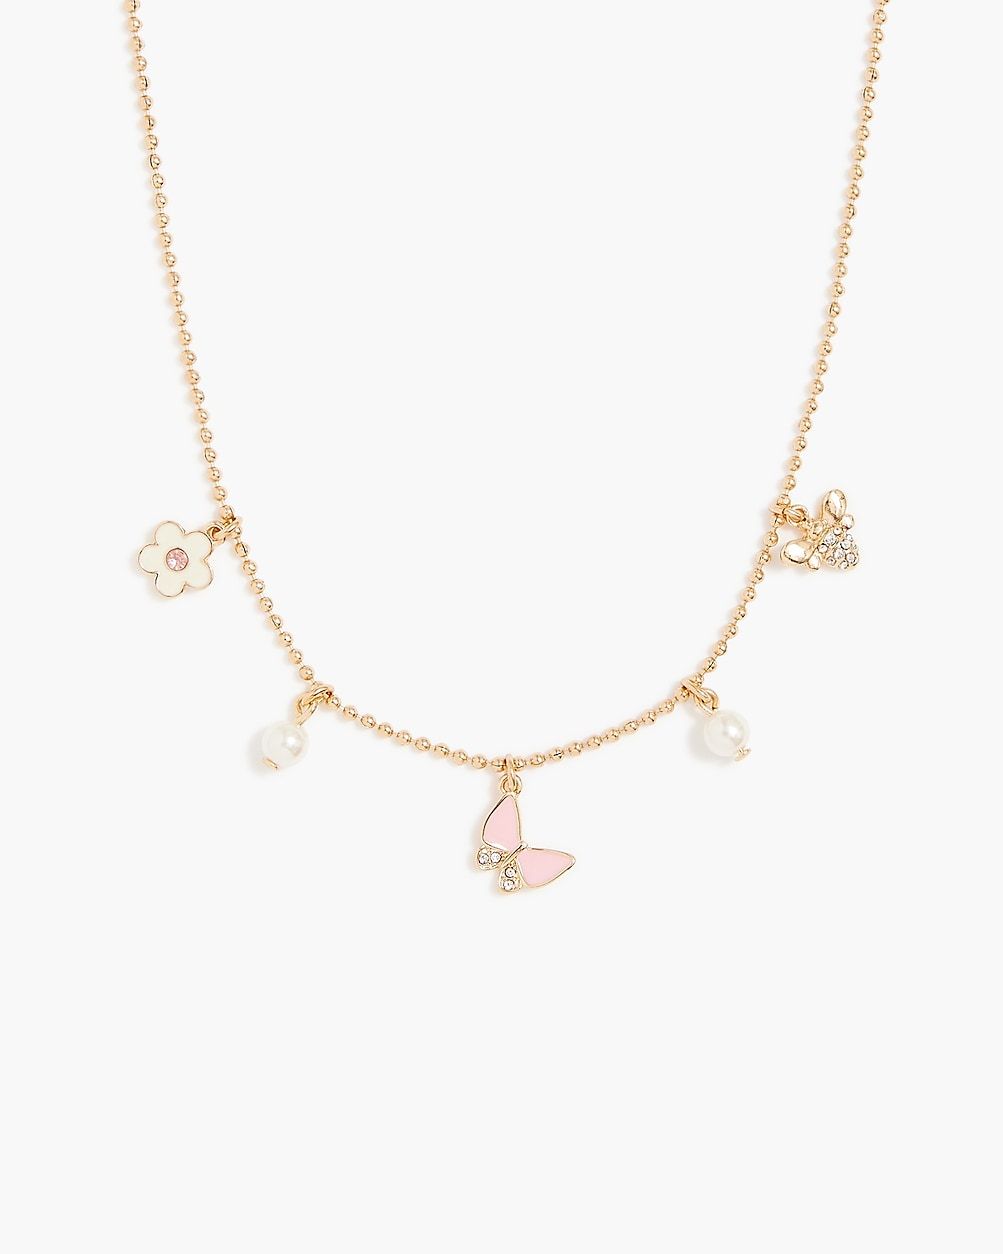 Girls' charm necklace | J.Crew Factory